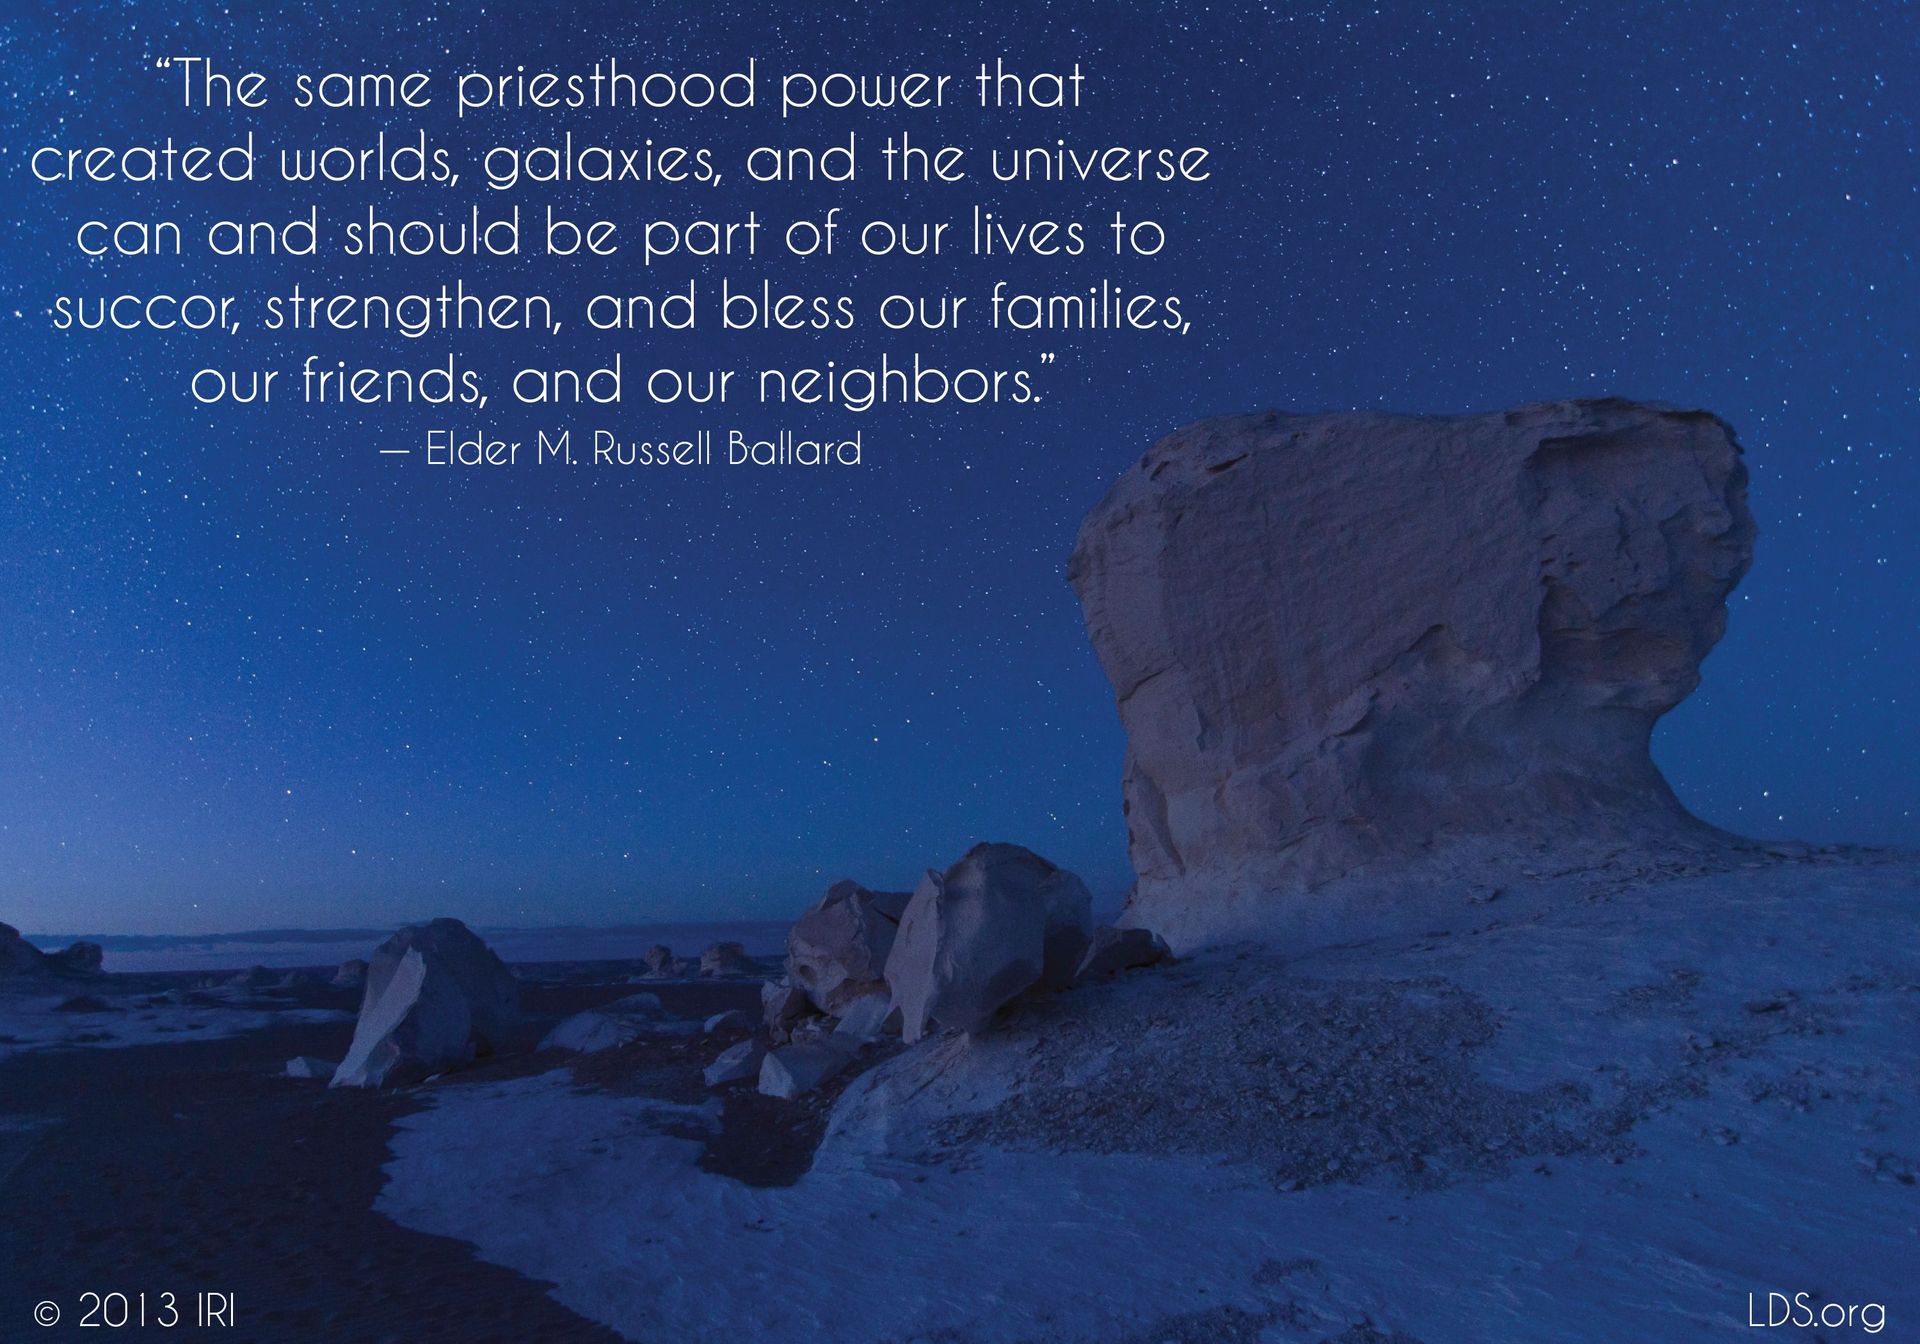 “The same priesthood power that created worlds, galaxies, and the universe can and should be part of our lives to succor, strengthen, and bless our families, our friends, and our neighbors.”—Elder M. Russell Ballard, “This Is My Work and Glory” © undefined ipCode 1.